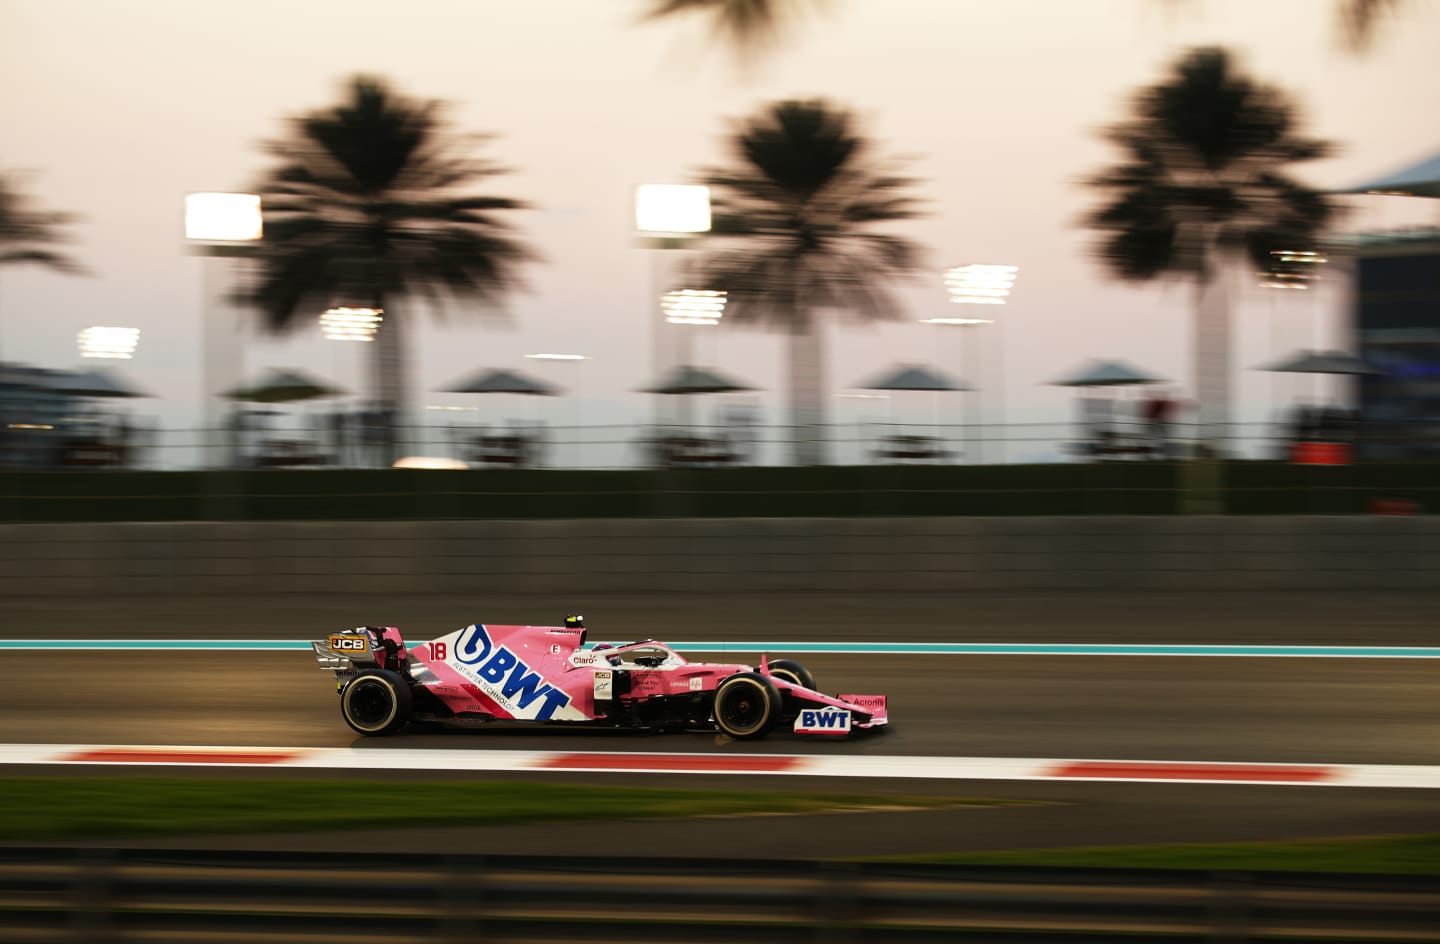 ABU DHABI, UNITED ARAB EMIRATES - DECEMBER 13: Lance Stroll of Canada driving the (18) Racing Point RP20 Mercedes during the F1 Grand Prix of Abu Dhabi at Yas Marina Circuit on December 13, 2020 in Abu Dhabi, United Arab Emirates. (Photo by Bryn Lennon/Getty Images)